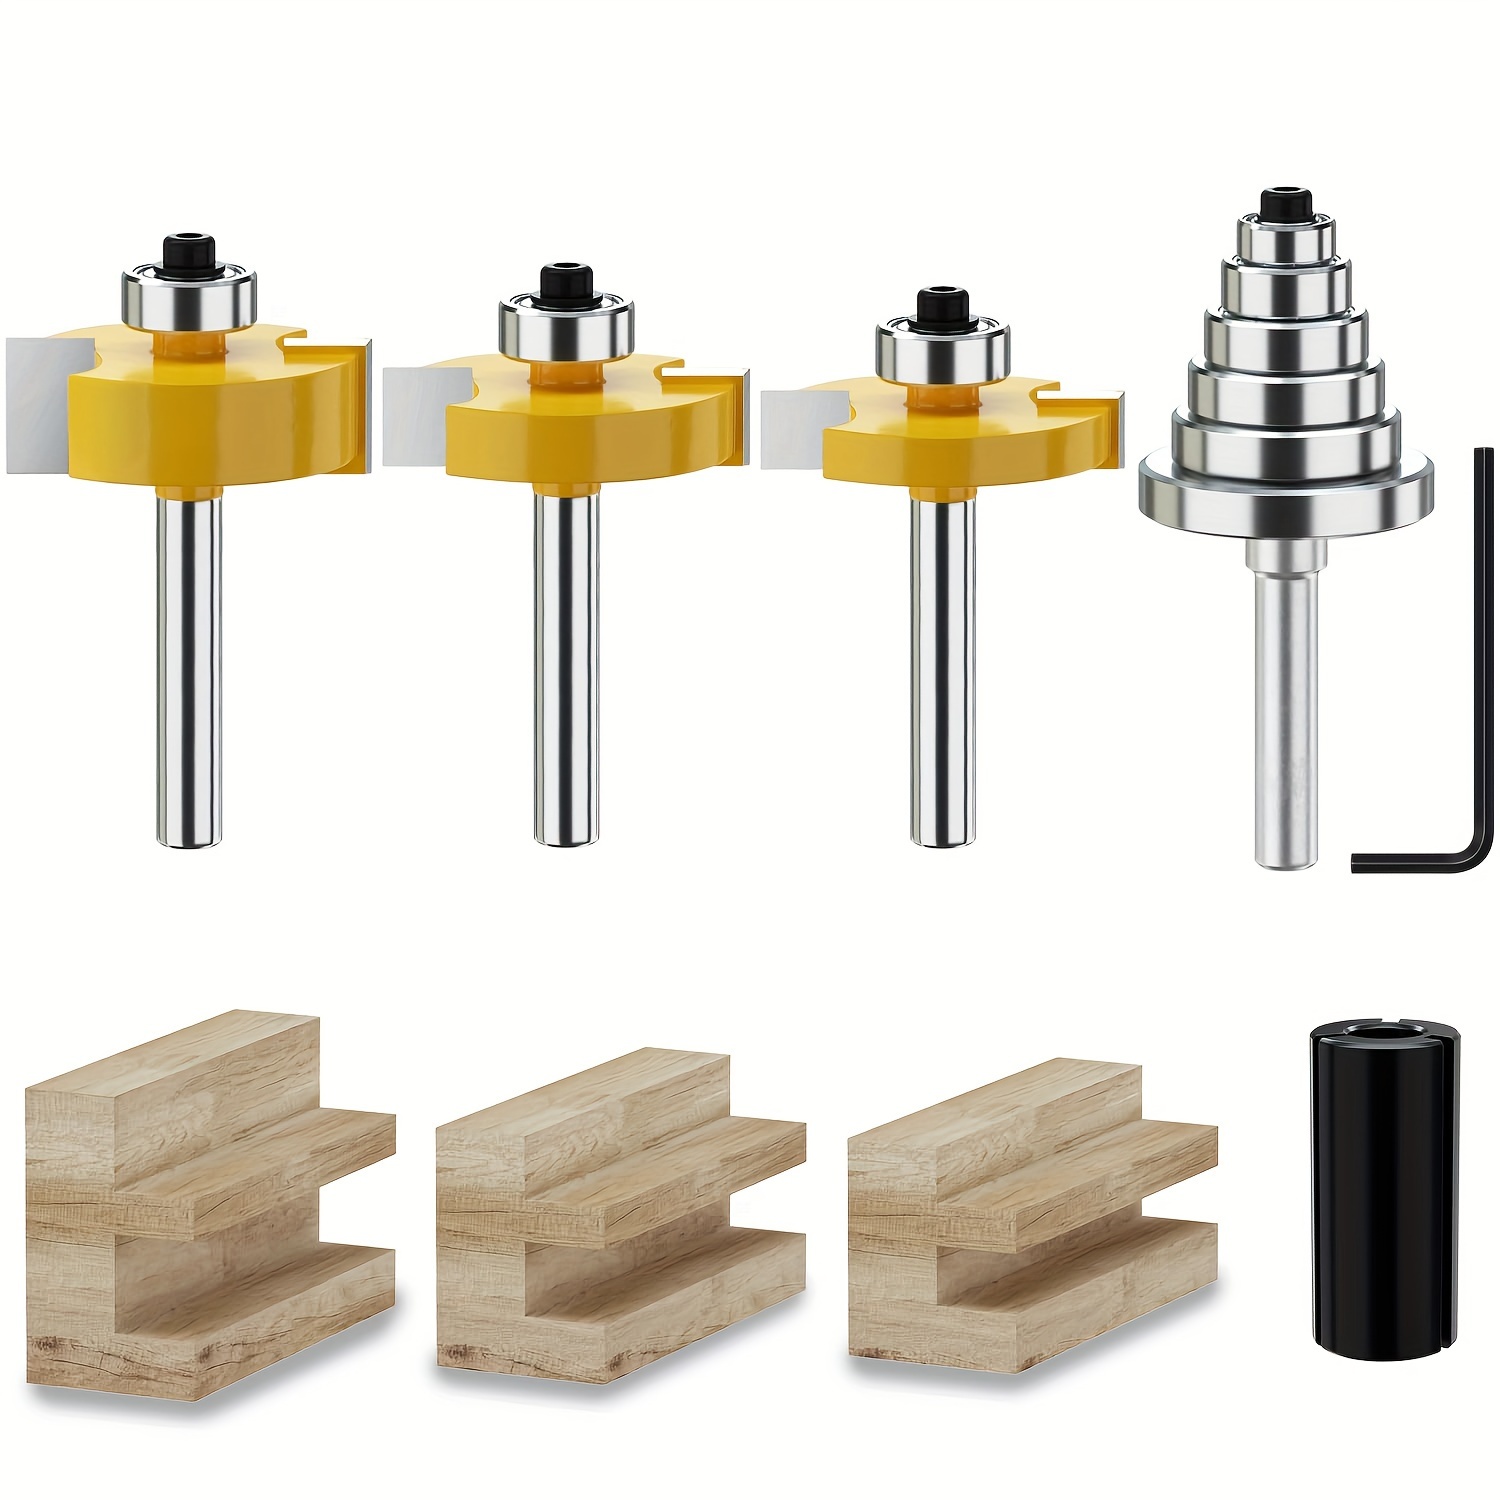 

1/4 Inch Shank Router, 3 Pieces Wood Router Bits With 6 Bearings Set (1/8", 1/4", 5/16", 3/8", 7/16", 1/2" Bearings)